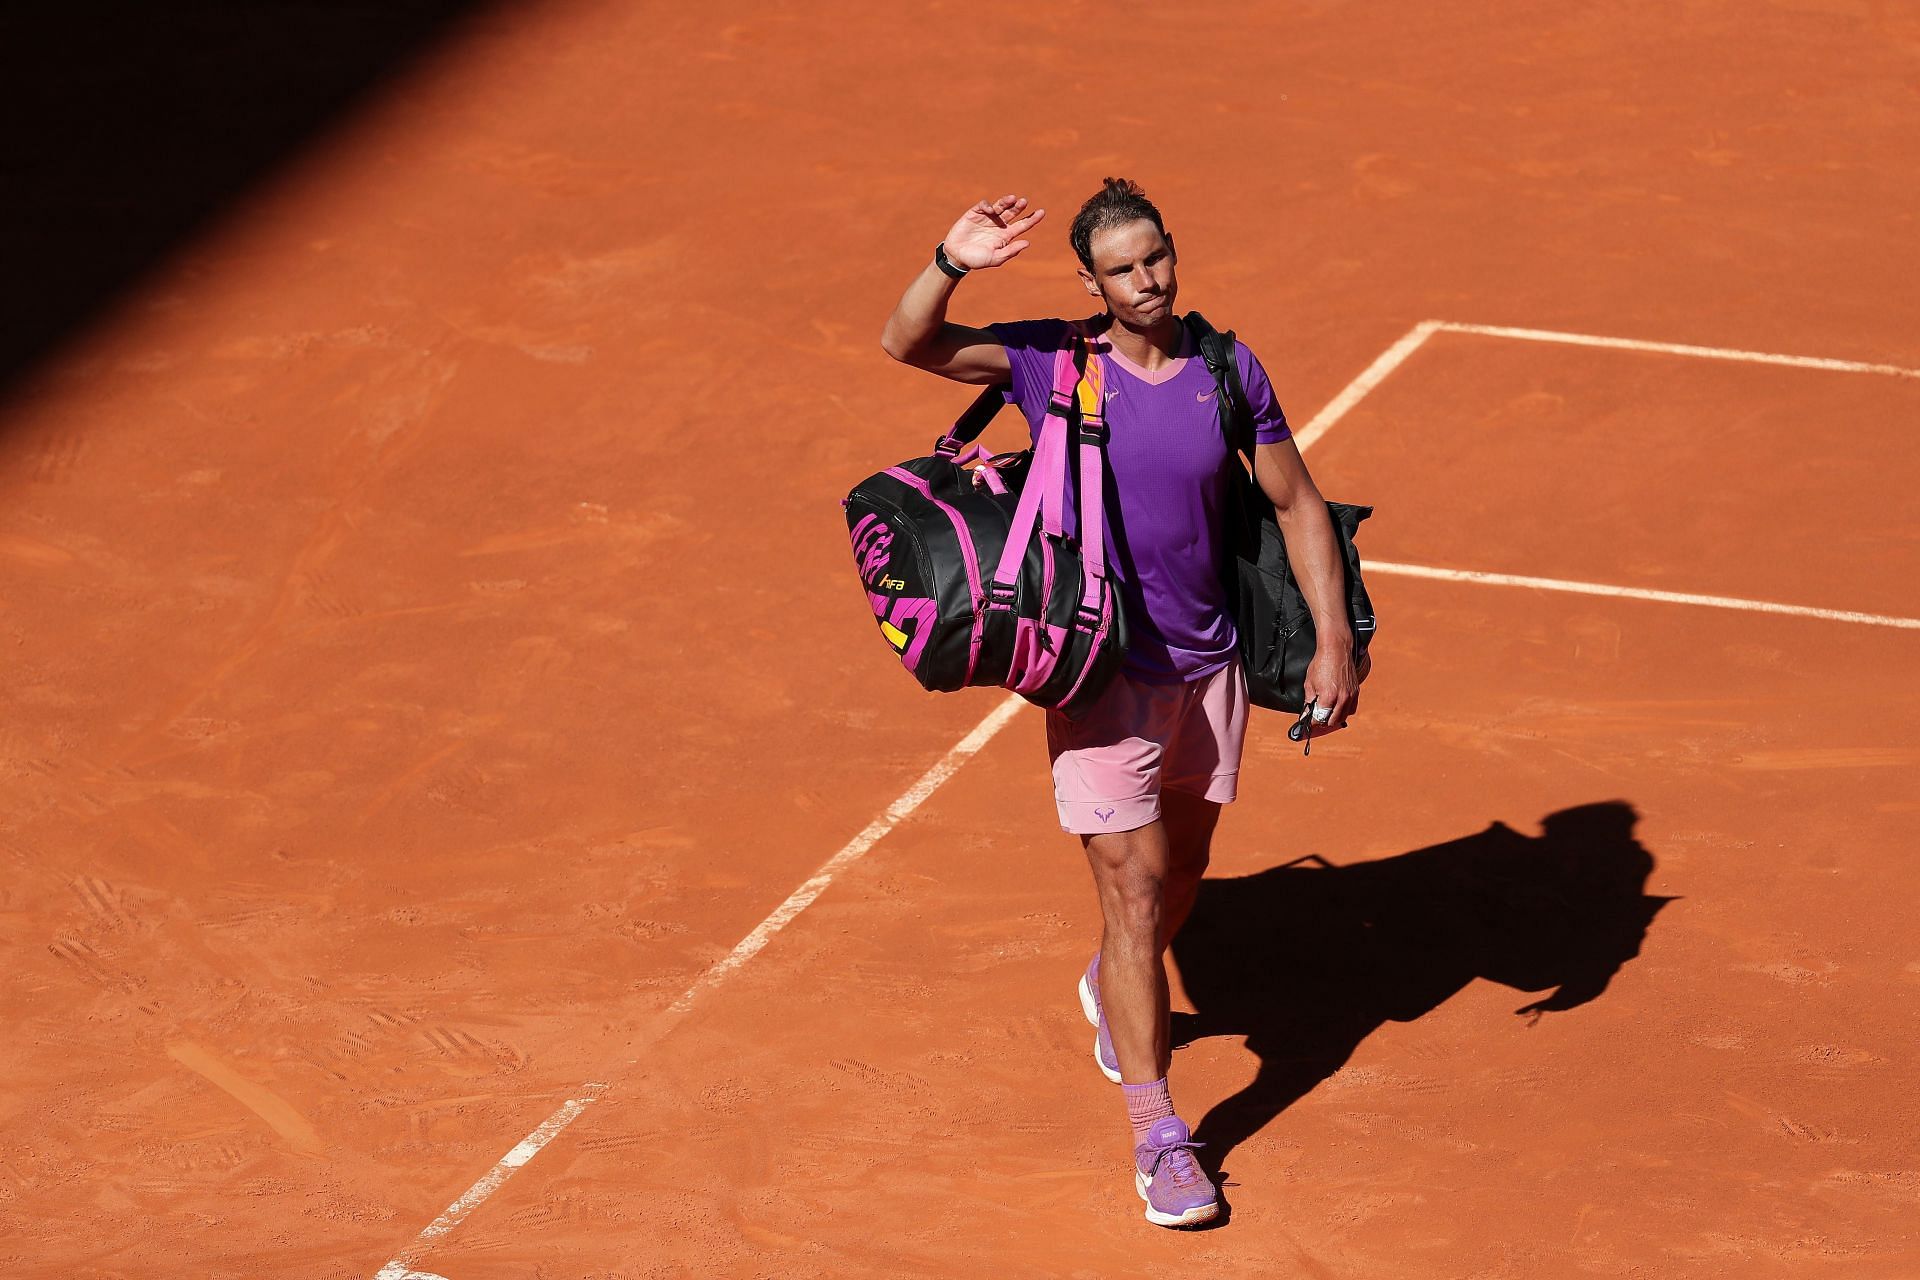 Rafael Nadal lost to Alexander Zverev in the quarterfinal of the Madrid Open last year.